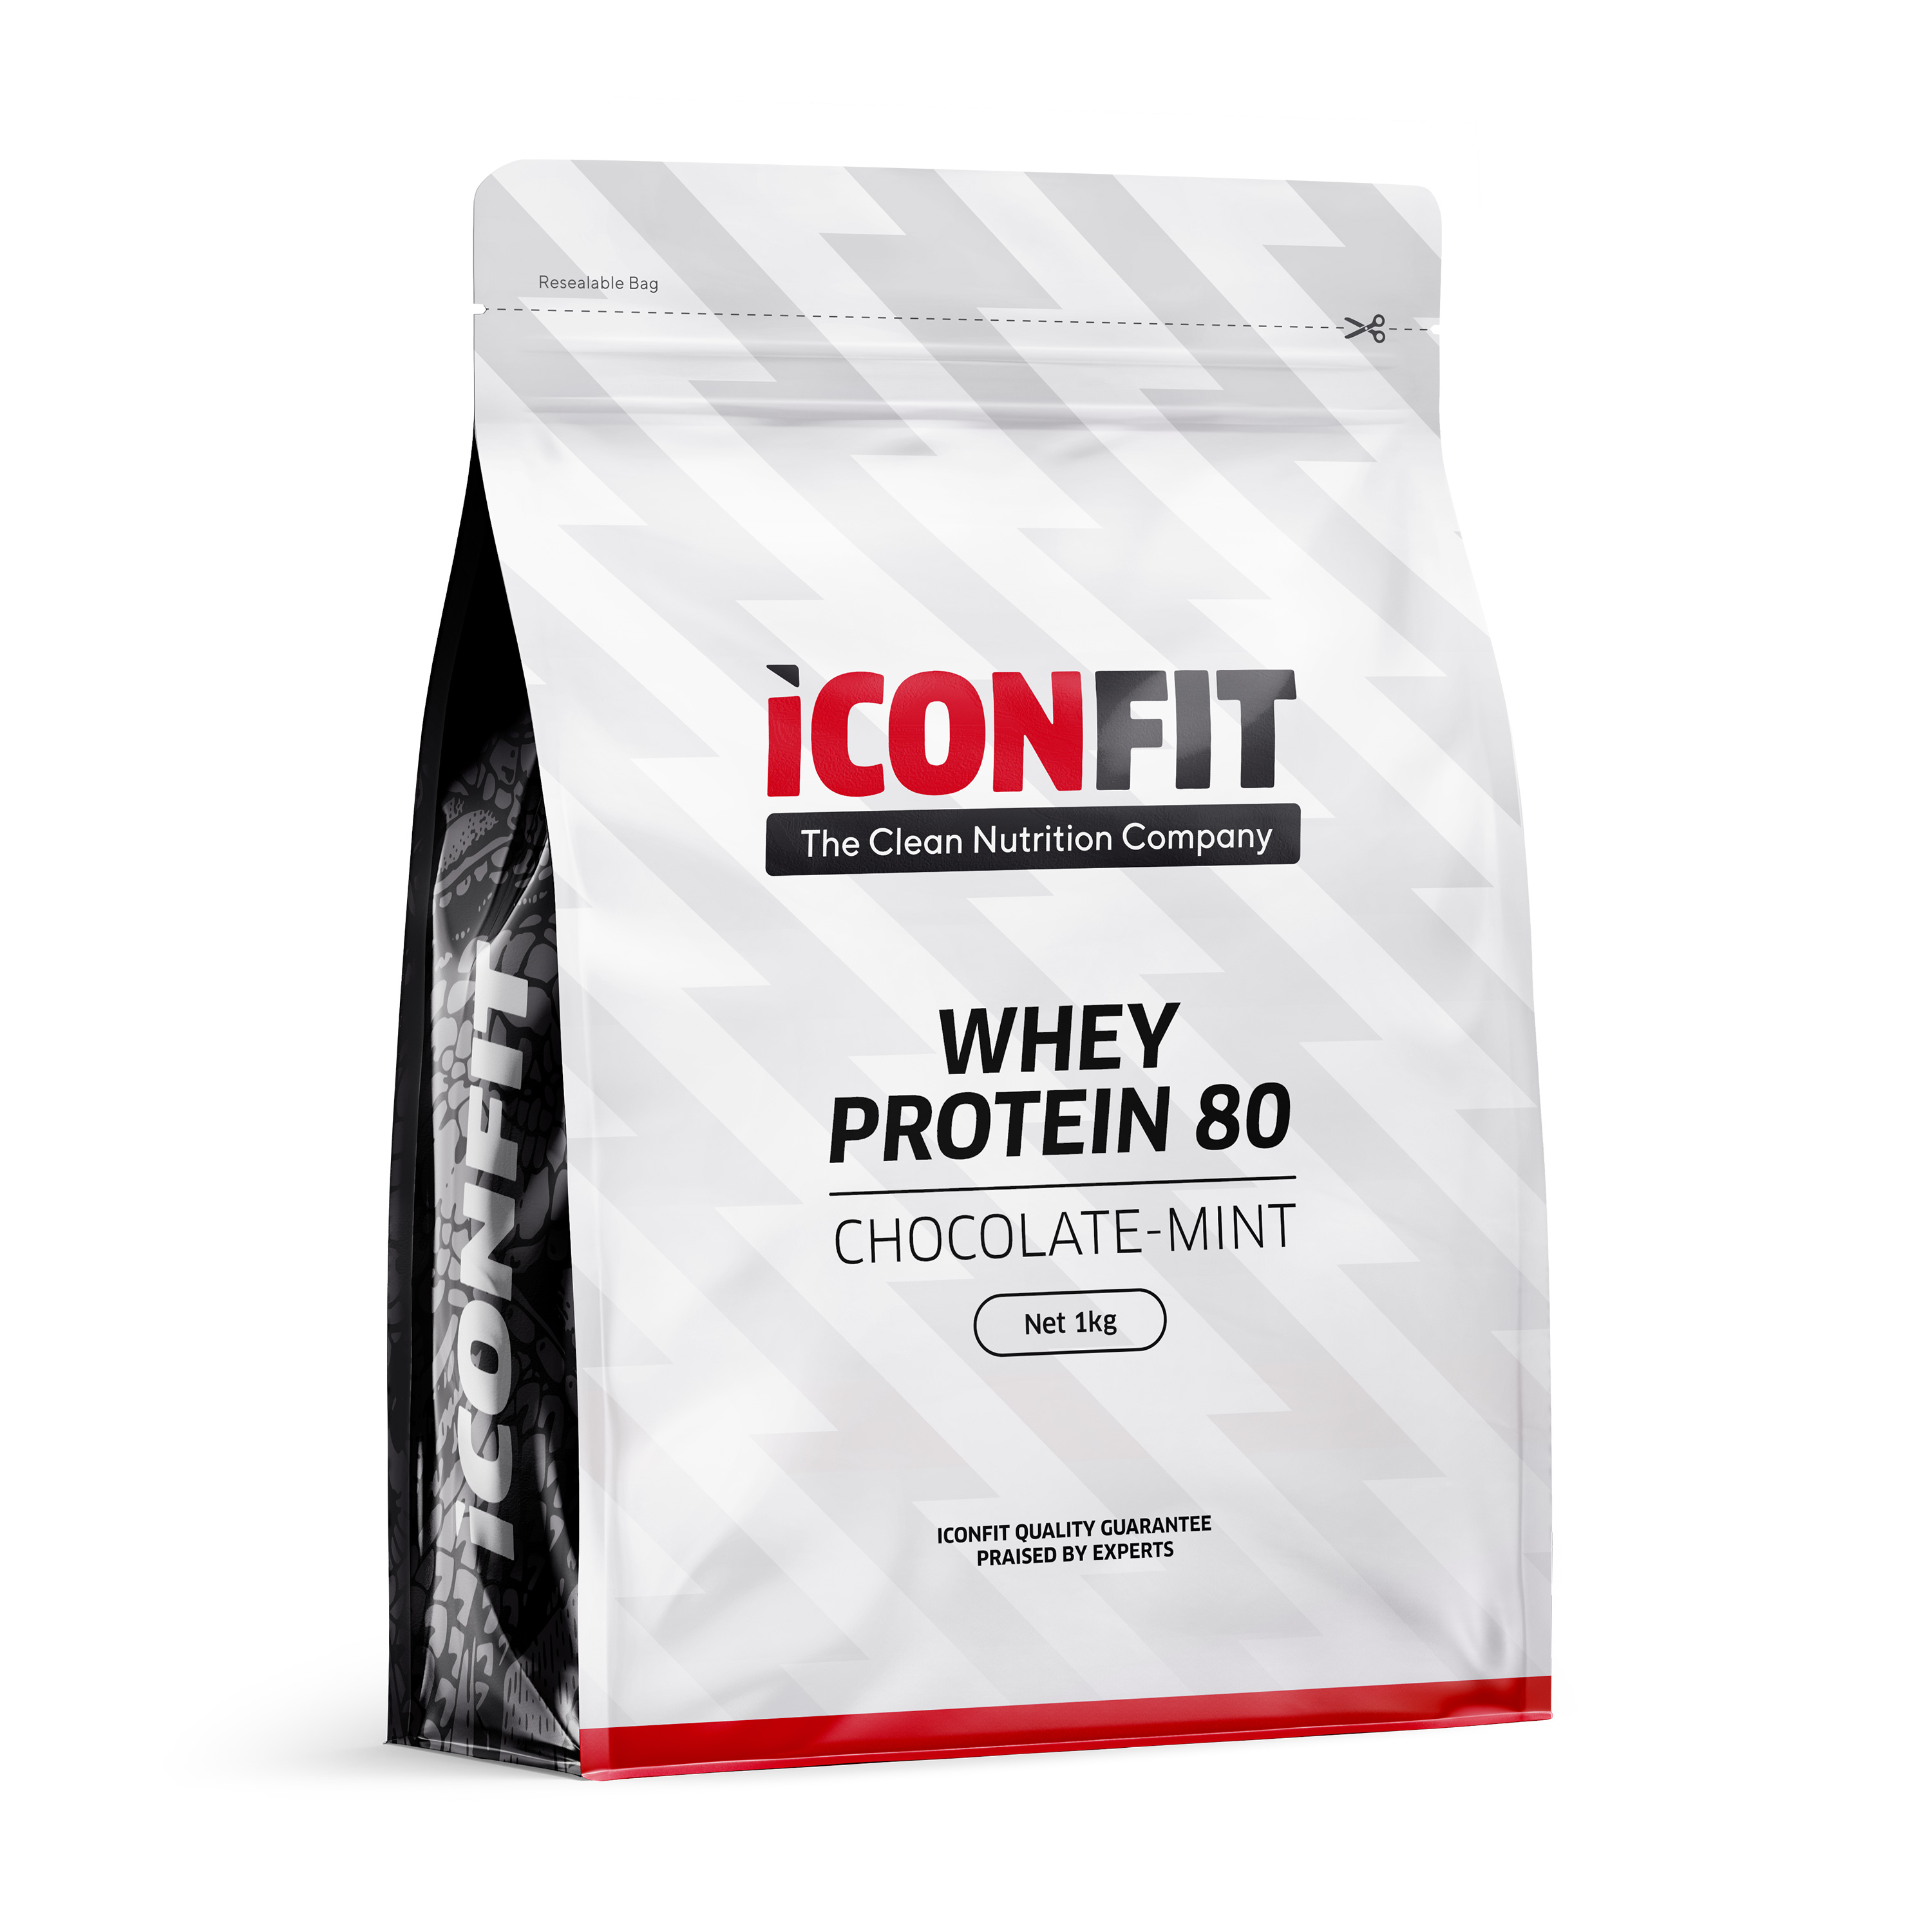 ICONFIT-Whey-Protein-80-Chocolate-mint-1000g